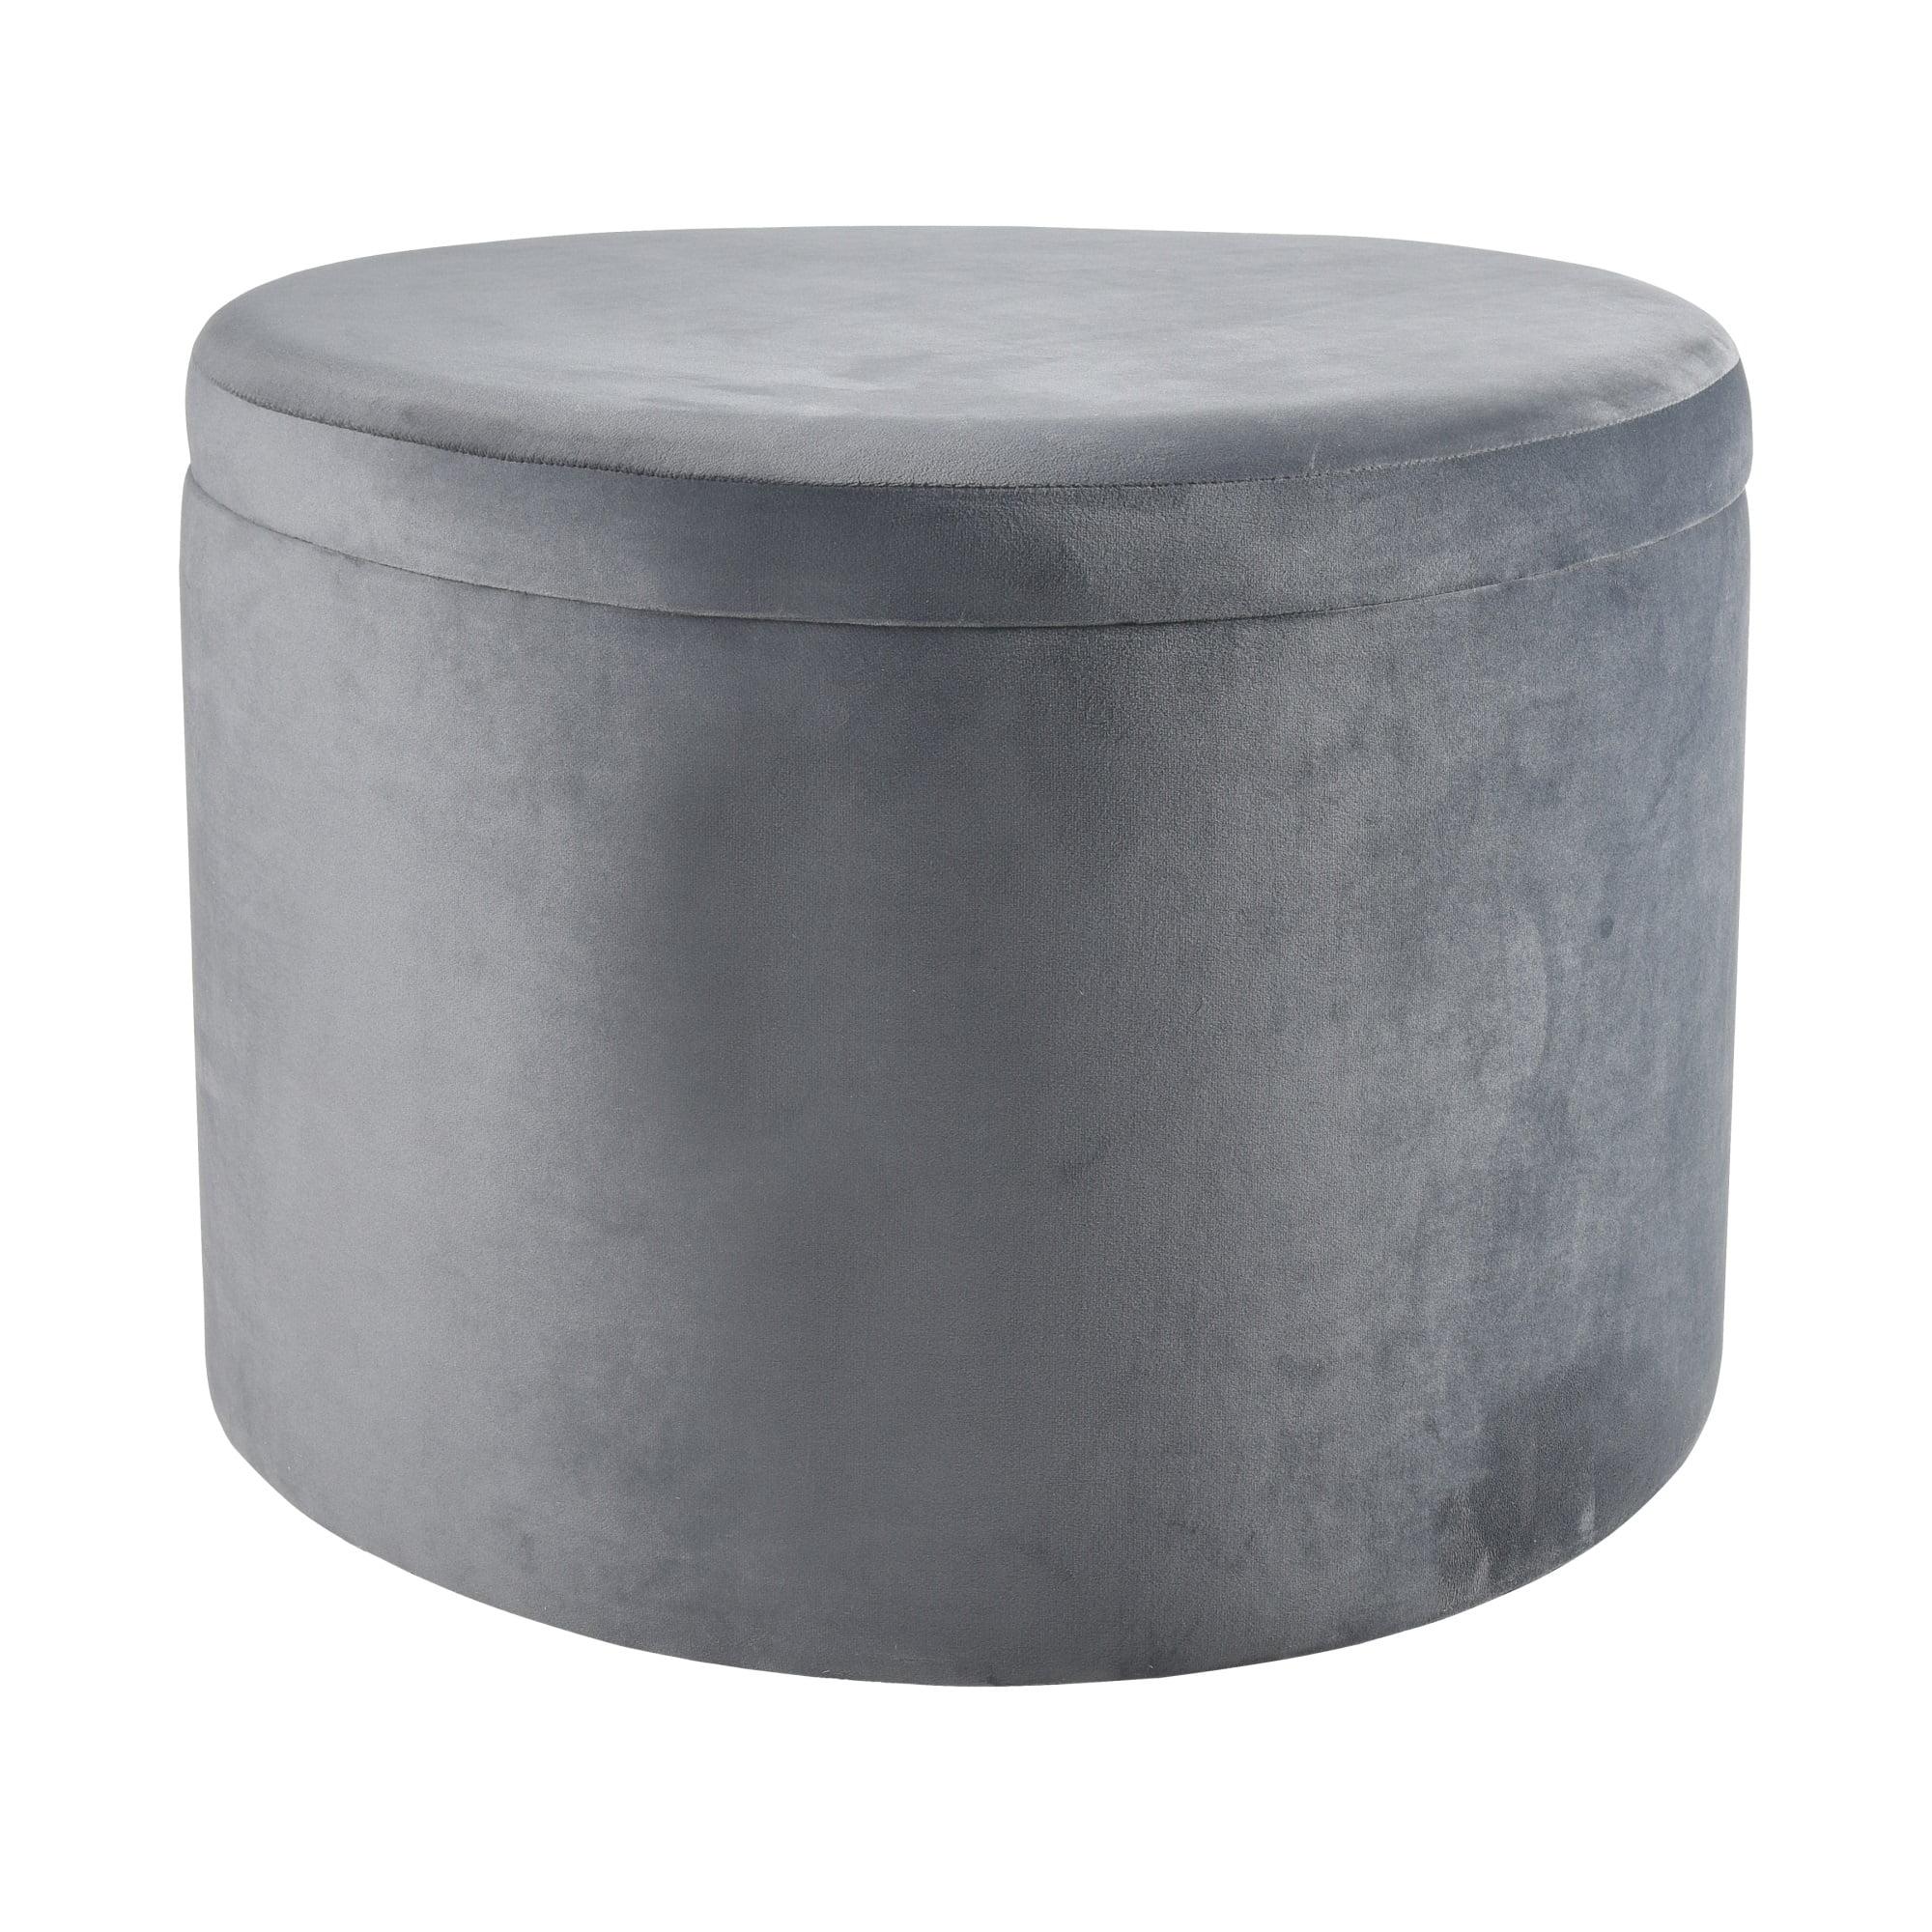 Linder Charcoal Drum Storage Ottoman with Brass Band